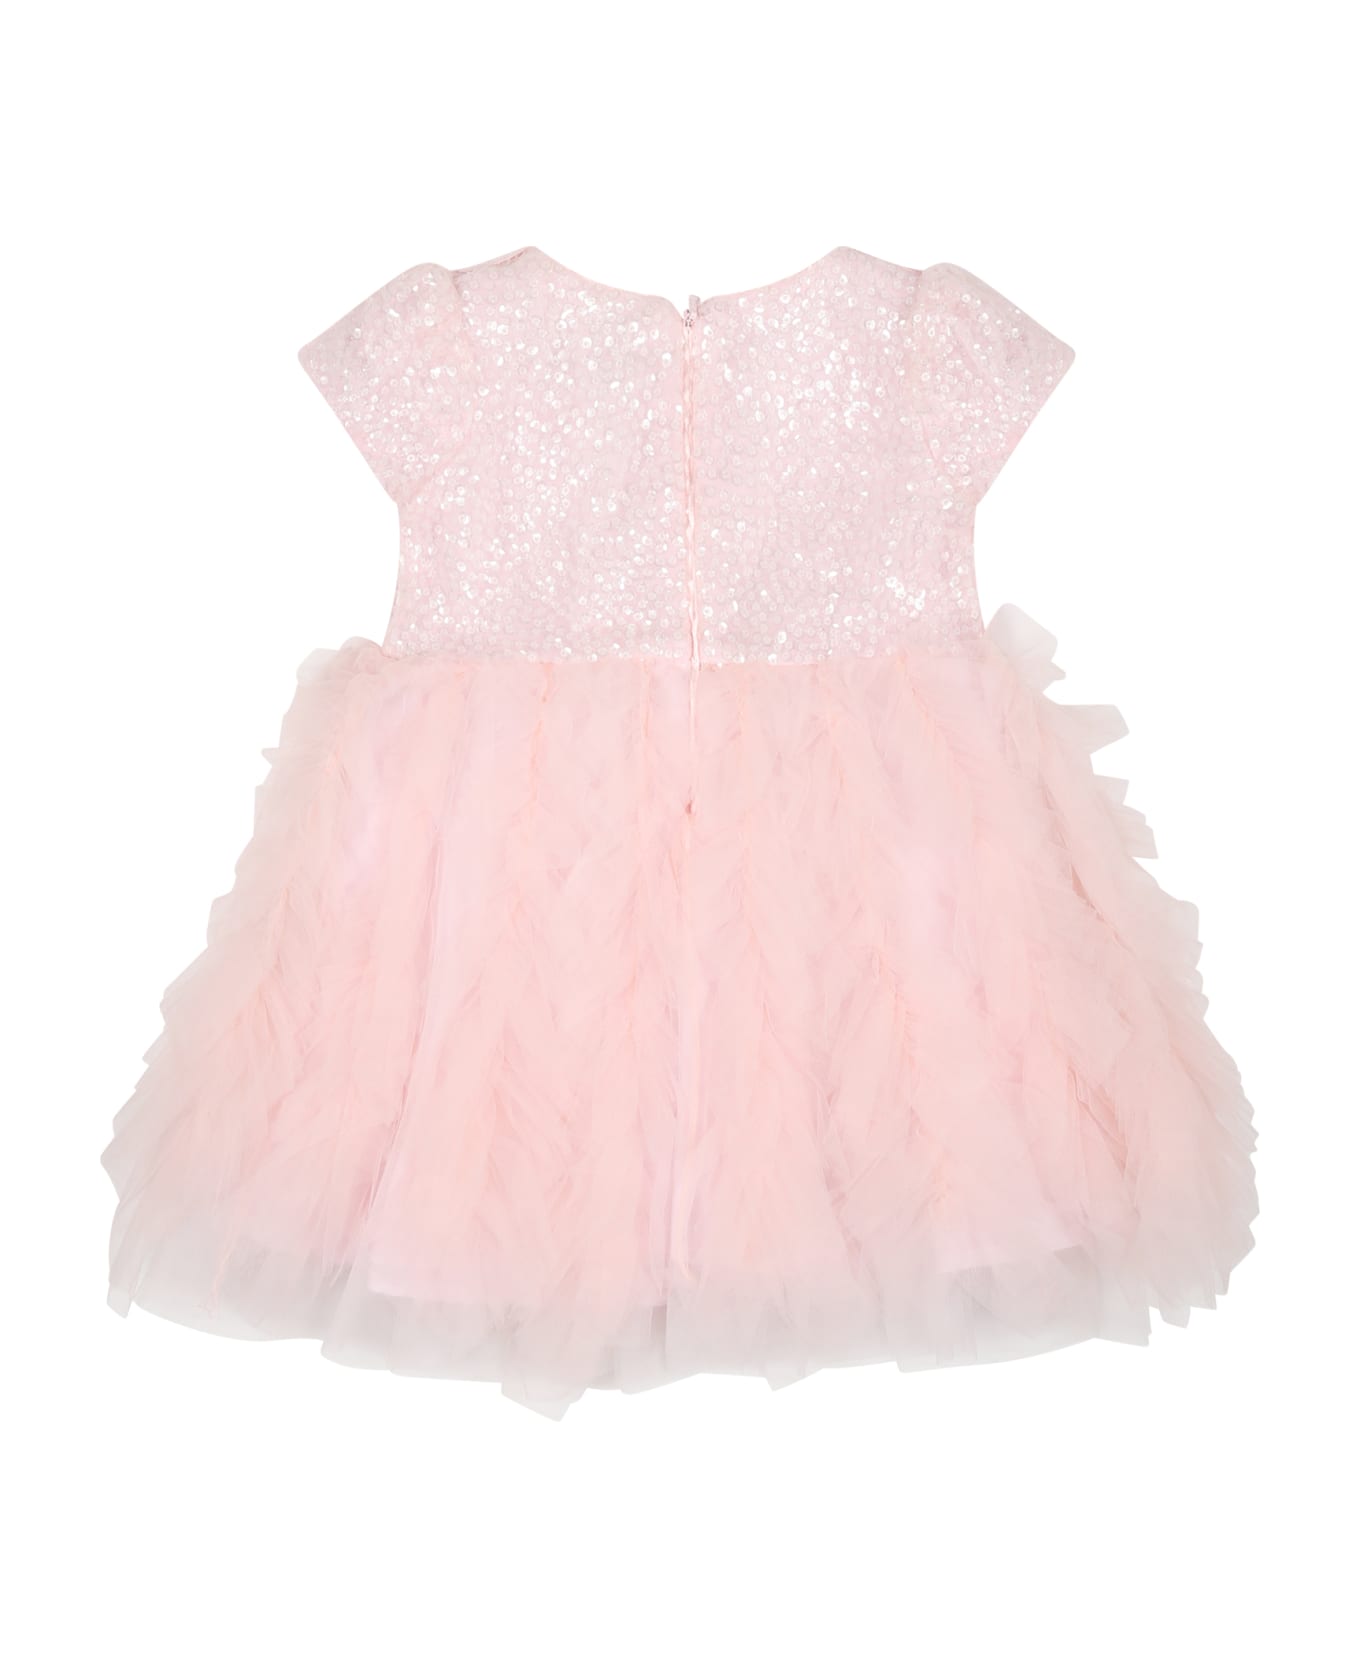 Monnalisa Pink Dress For Baby Girl With Sequins - Pink